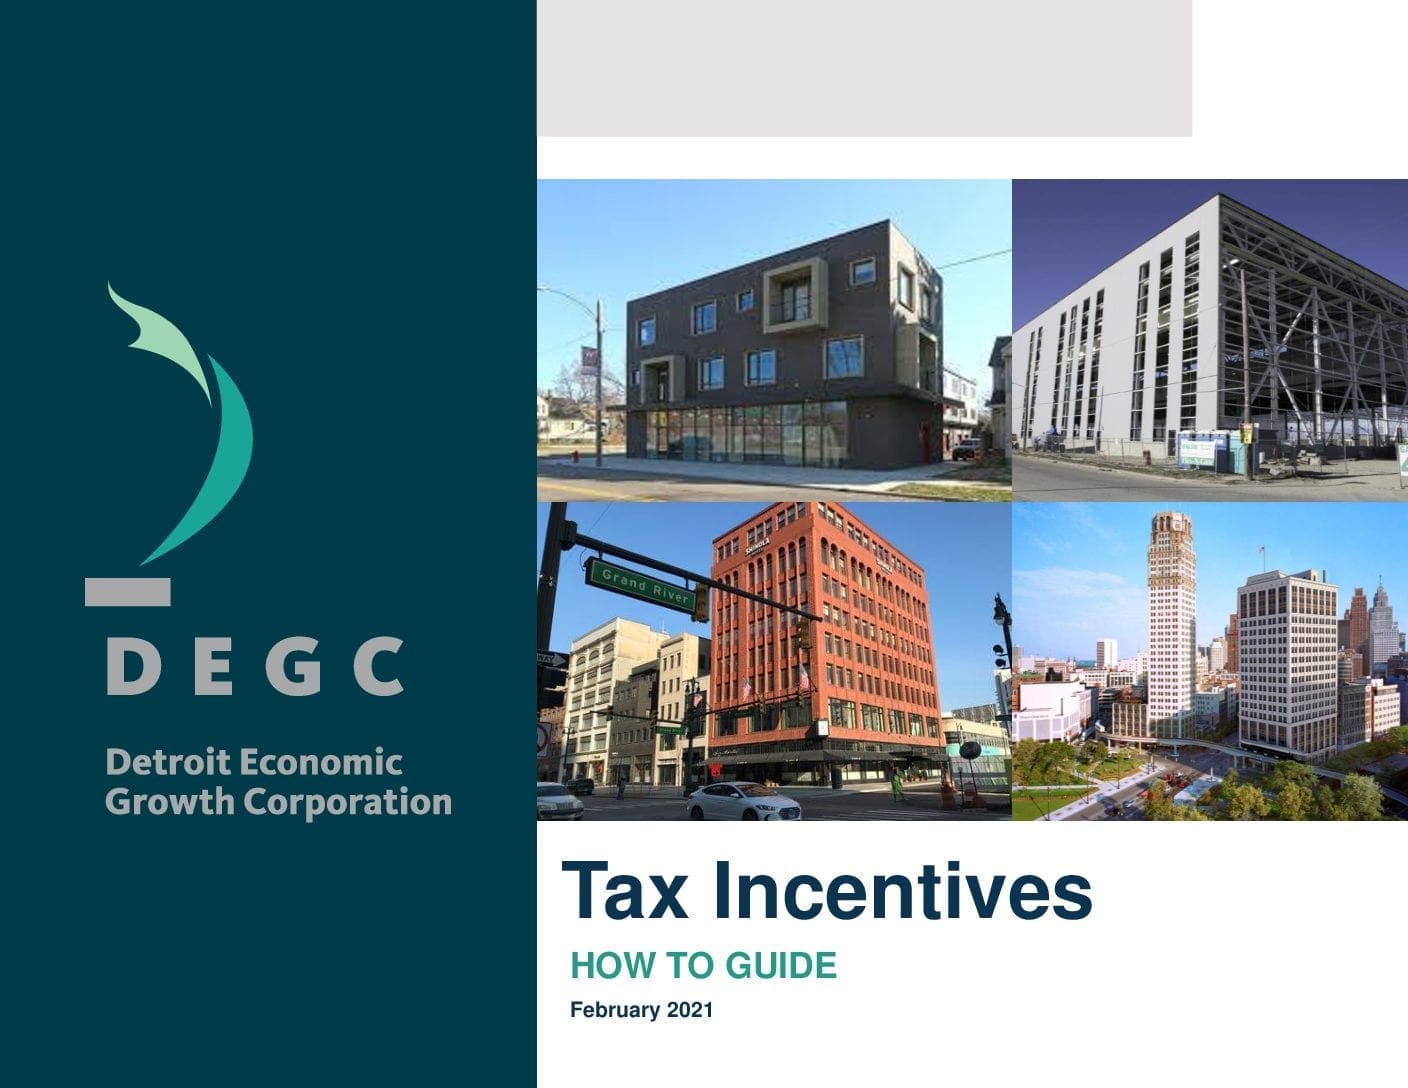 The cover of the DEGC Tax Incentives How-To Guide